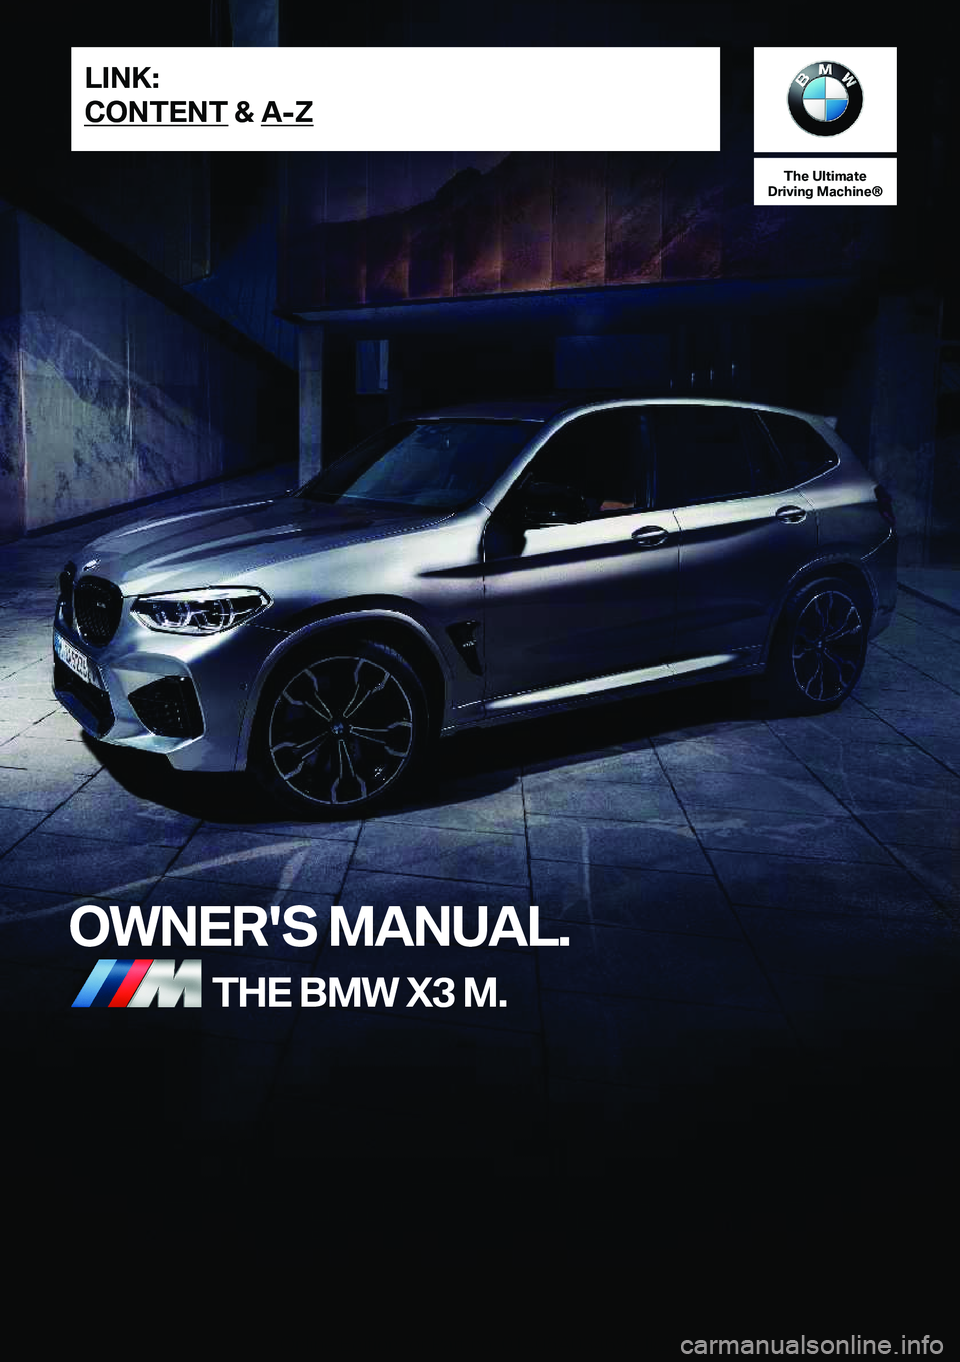 BMW X3 M 2021  Owners Manual �T�h�e��U�l�t�i�m�a�t�e
�D�r�i�v�i�n�g��M�a�c�h�i�n�e�n
�O�W�N�E�R�'�S��M�A�N�U�A�L�.�T�H�E��B�M�W��X�3��M�.�L�I�N�K�:
�C�O�N�T�E�N�T��&��A�-�Z�O�n�l�i�n�e��E�d�i�t�i�o�n��f�o�r��P�a�r�